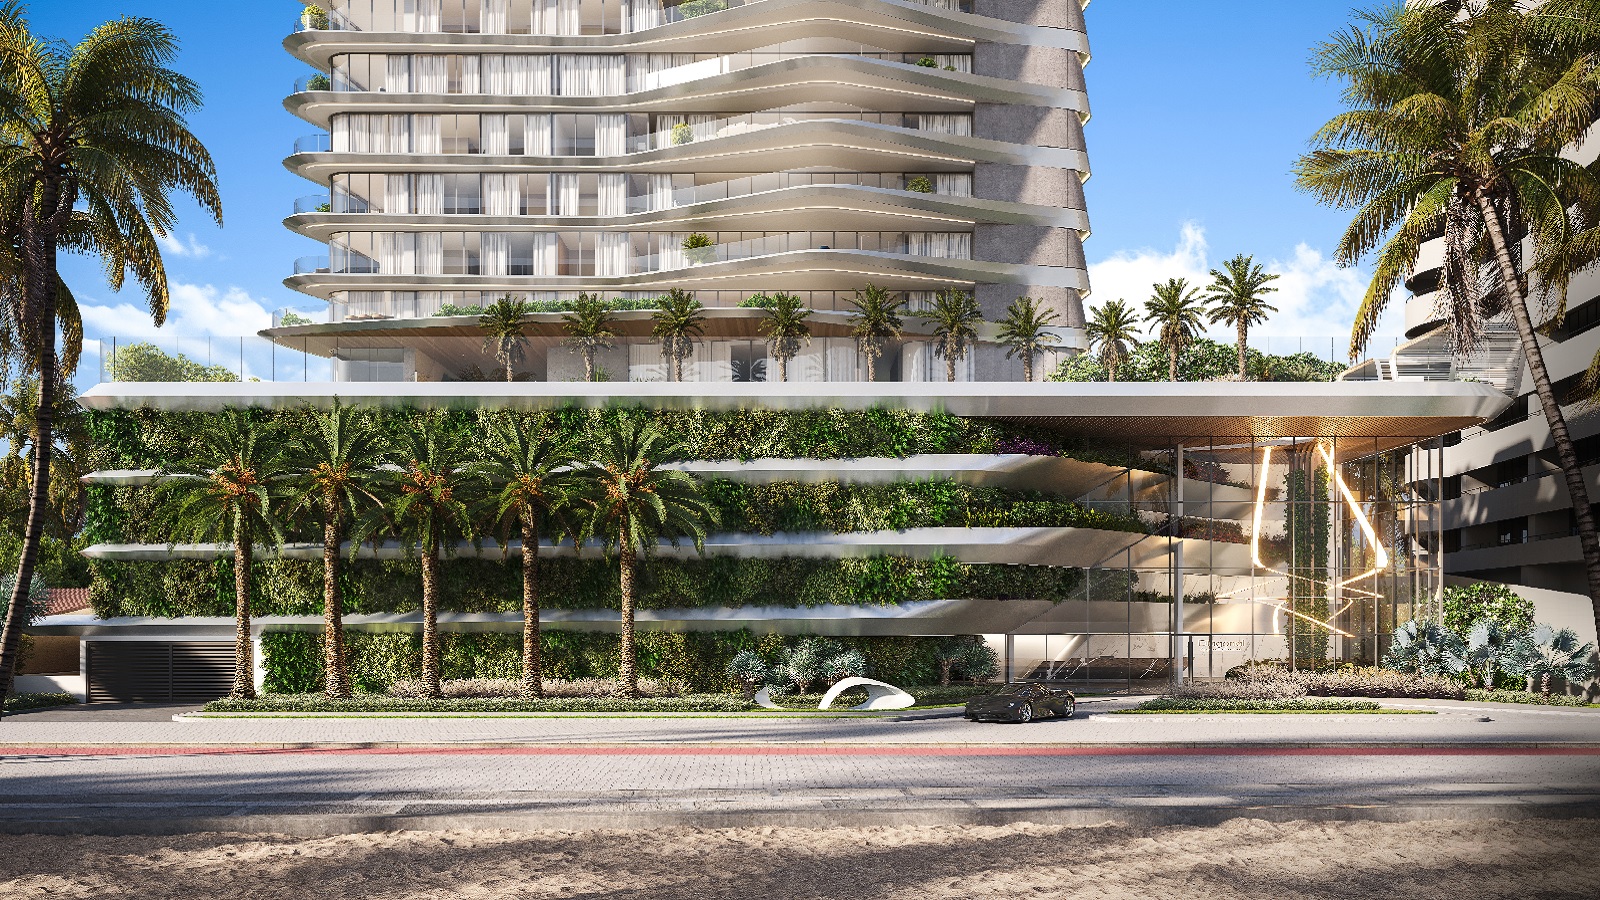 Diagonal by Pininfarina is a masterpiece of luxury and design in Brazil’s Fortaleza